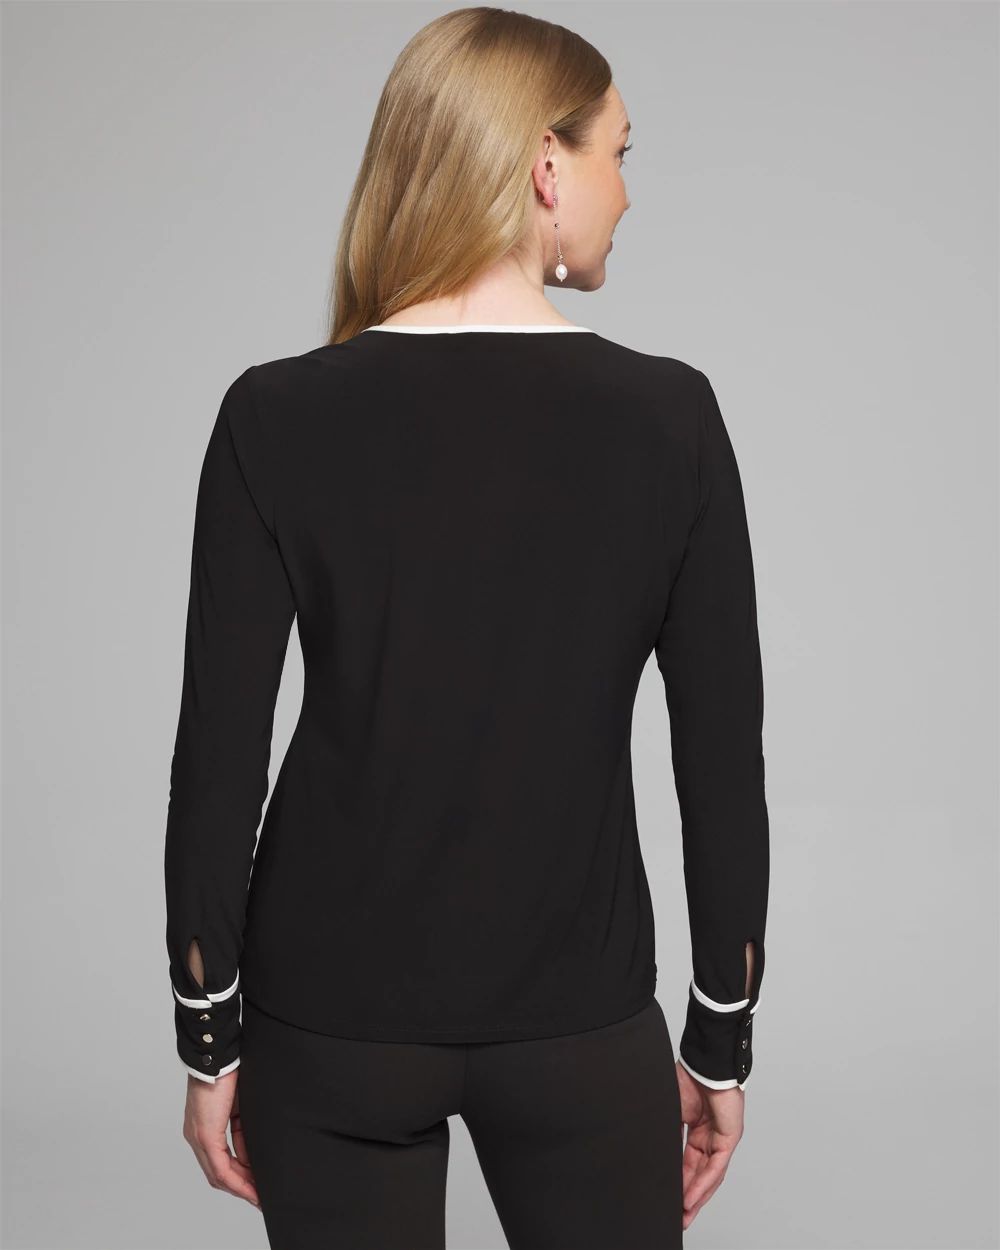 Outlet WHBM Crew Neck Front Detail Top click to view larger image.